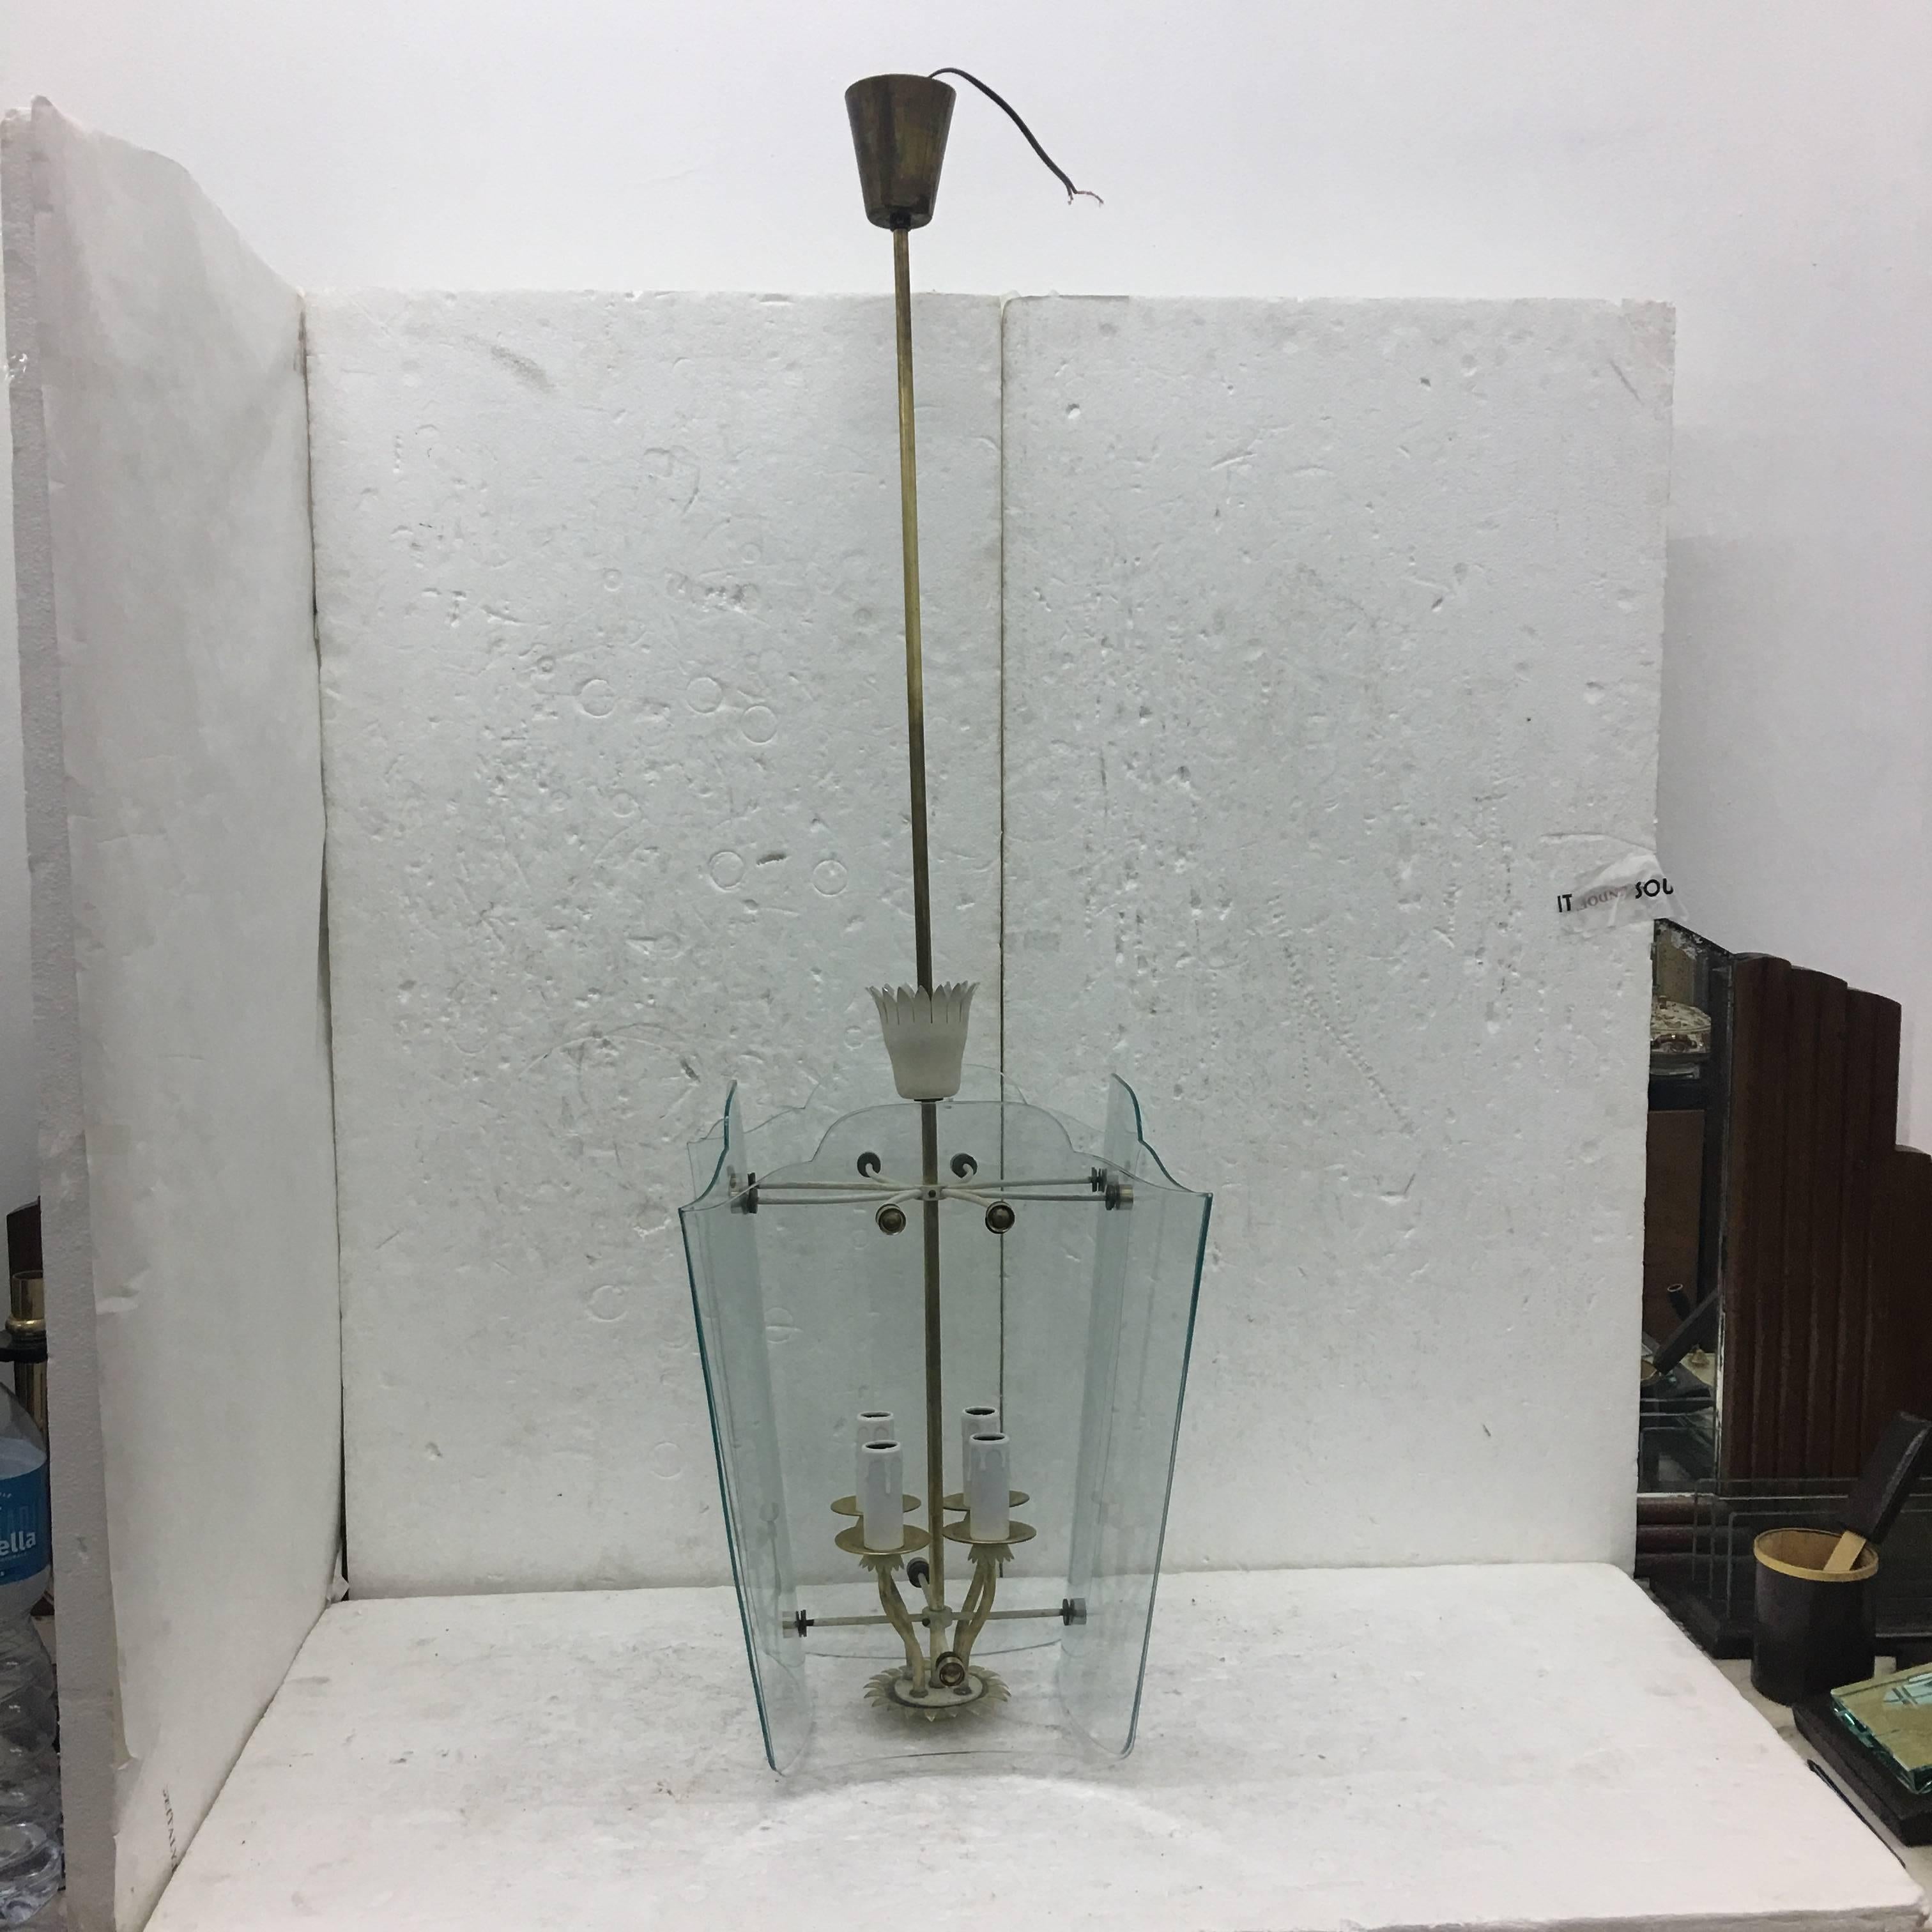 Amazing four-light pendant attributed to Pietro Chiesa for Fontana Arte, curved glass, fully restored electrical parts, just little chip showed in a photo, rare hanging light fixture featuring four concave sheets of crystal that are graduated in